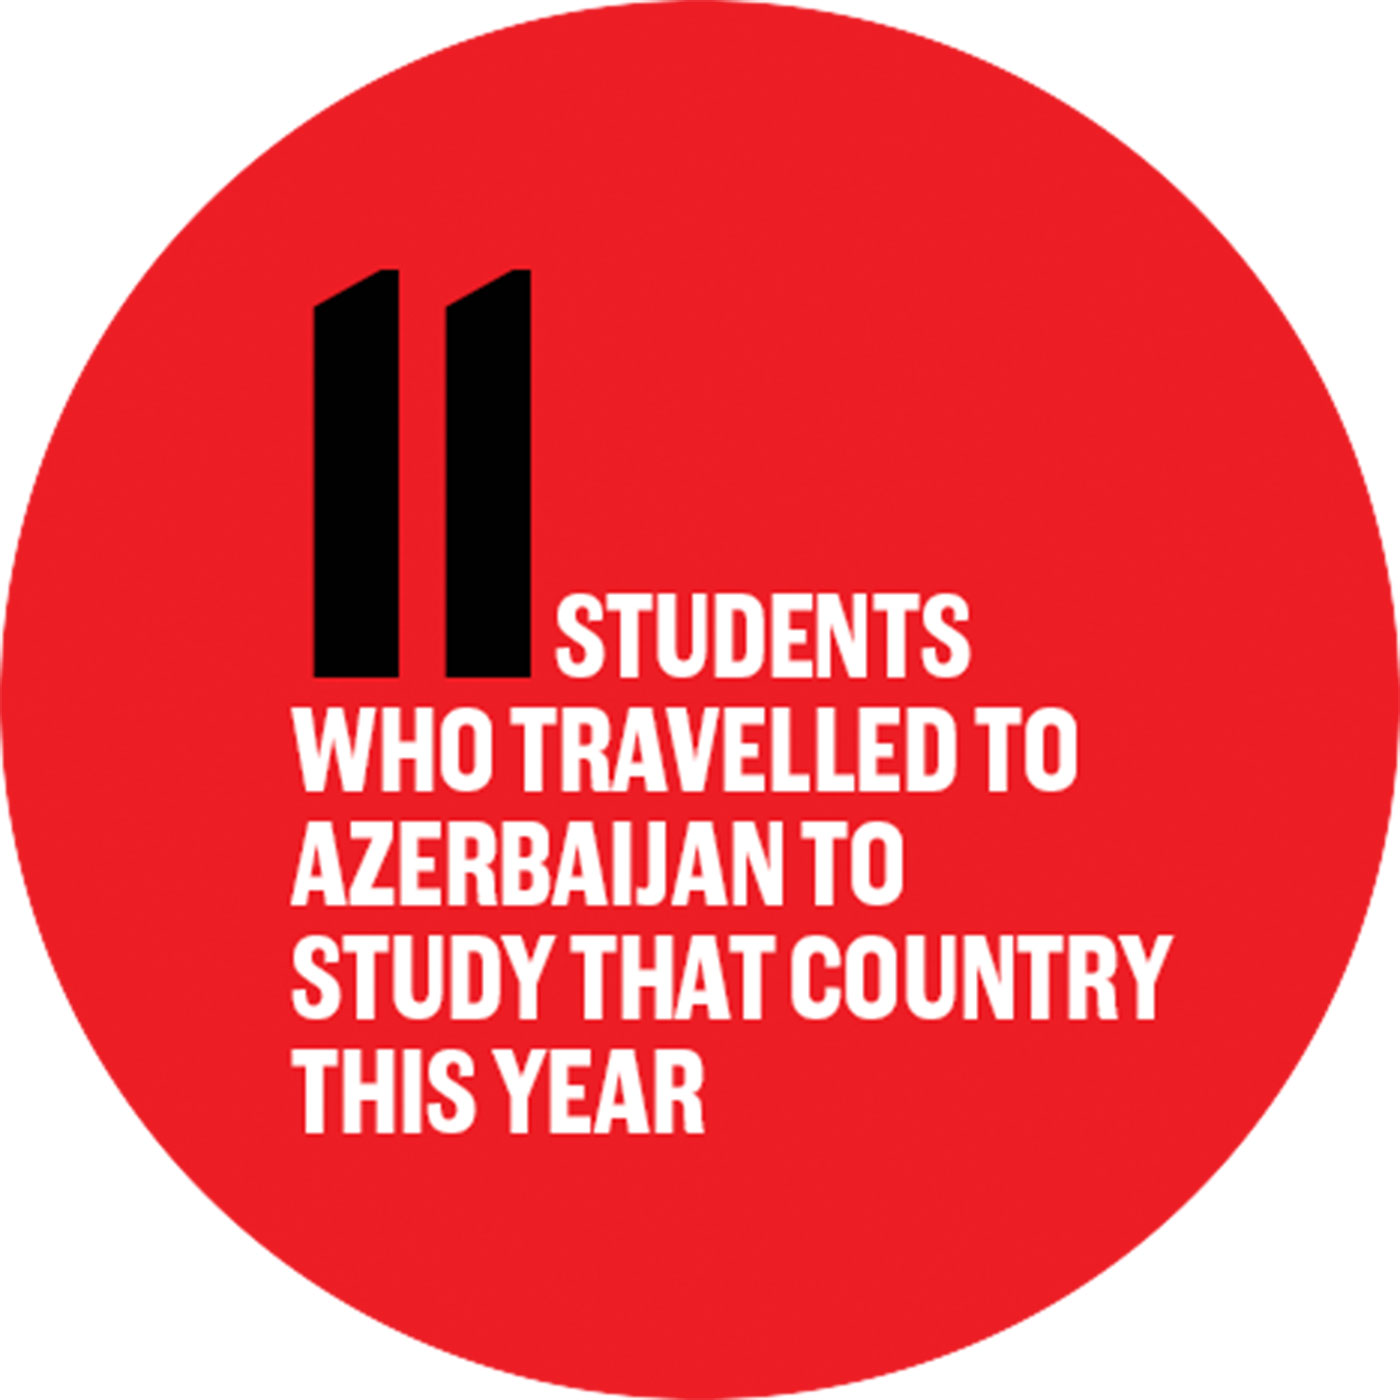 11 students who travelLed to Azerbaijan to study that country this year